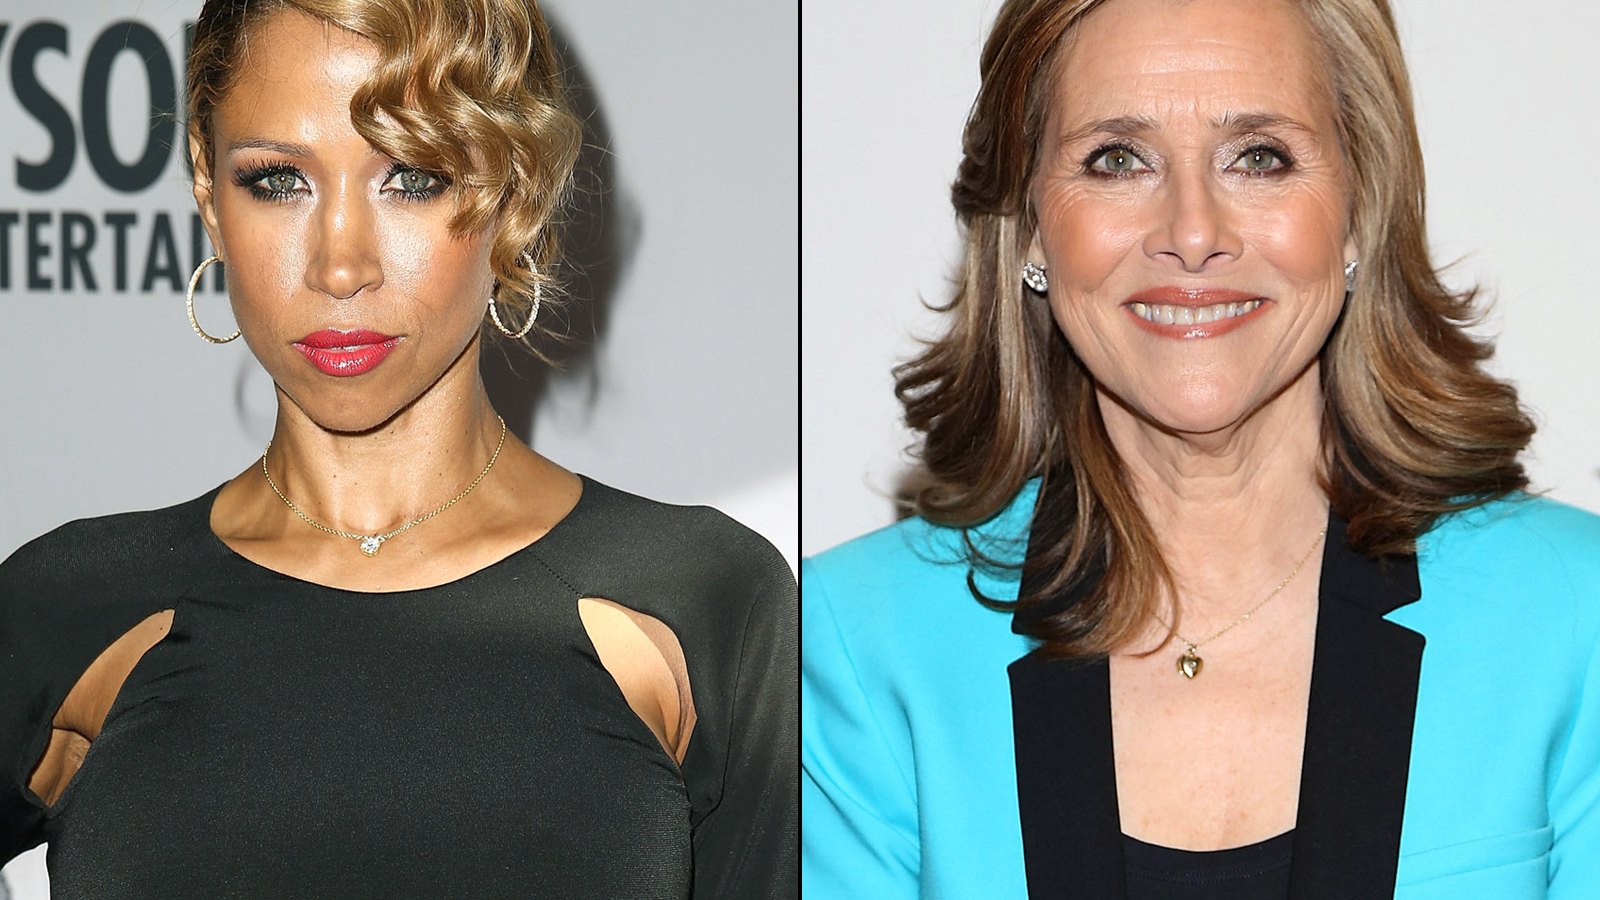 Stacey Dash and Meredith Vieira